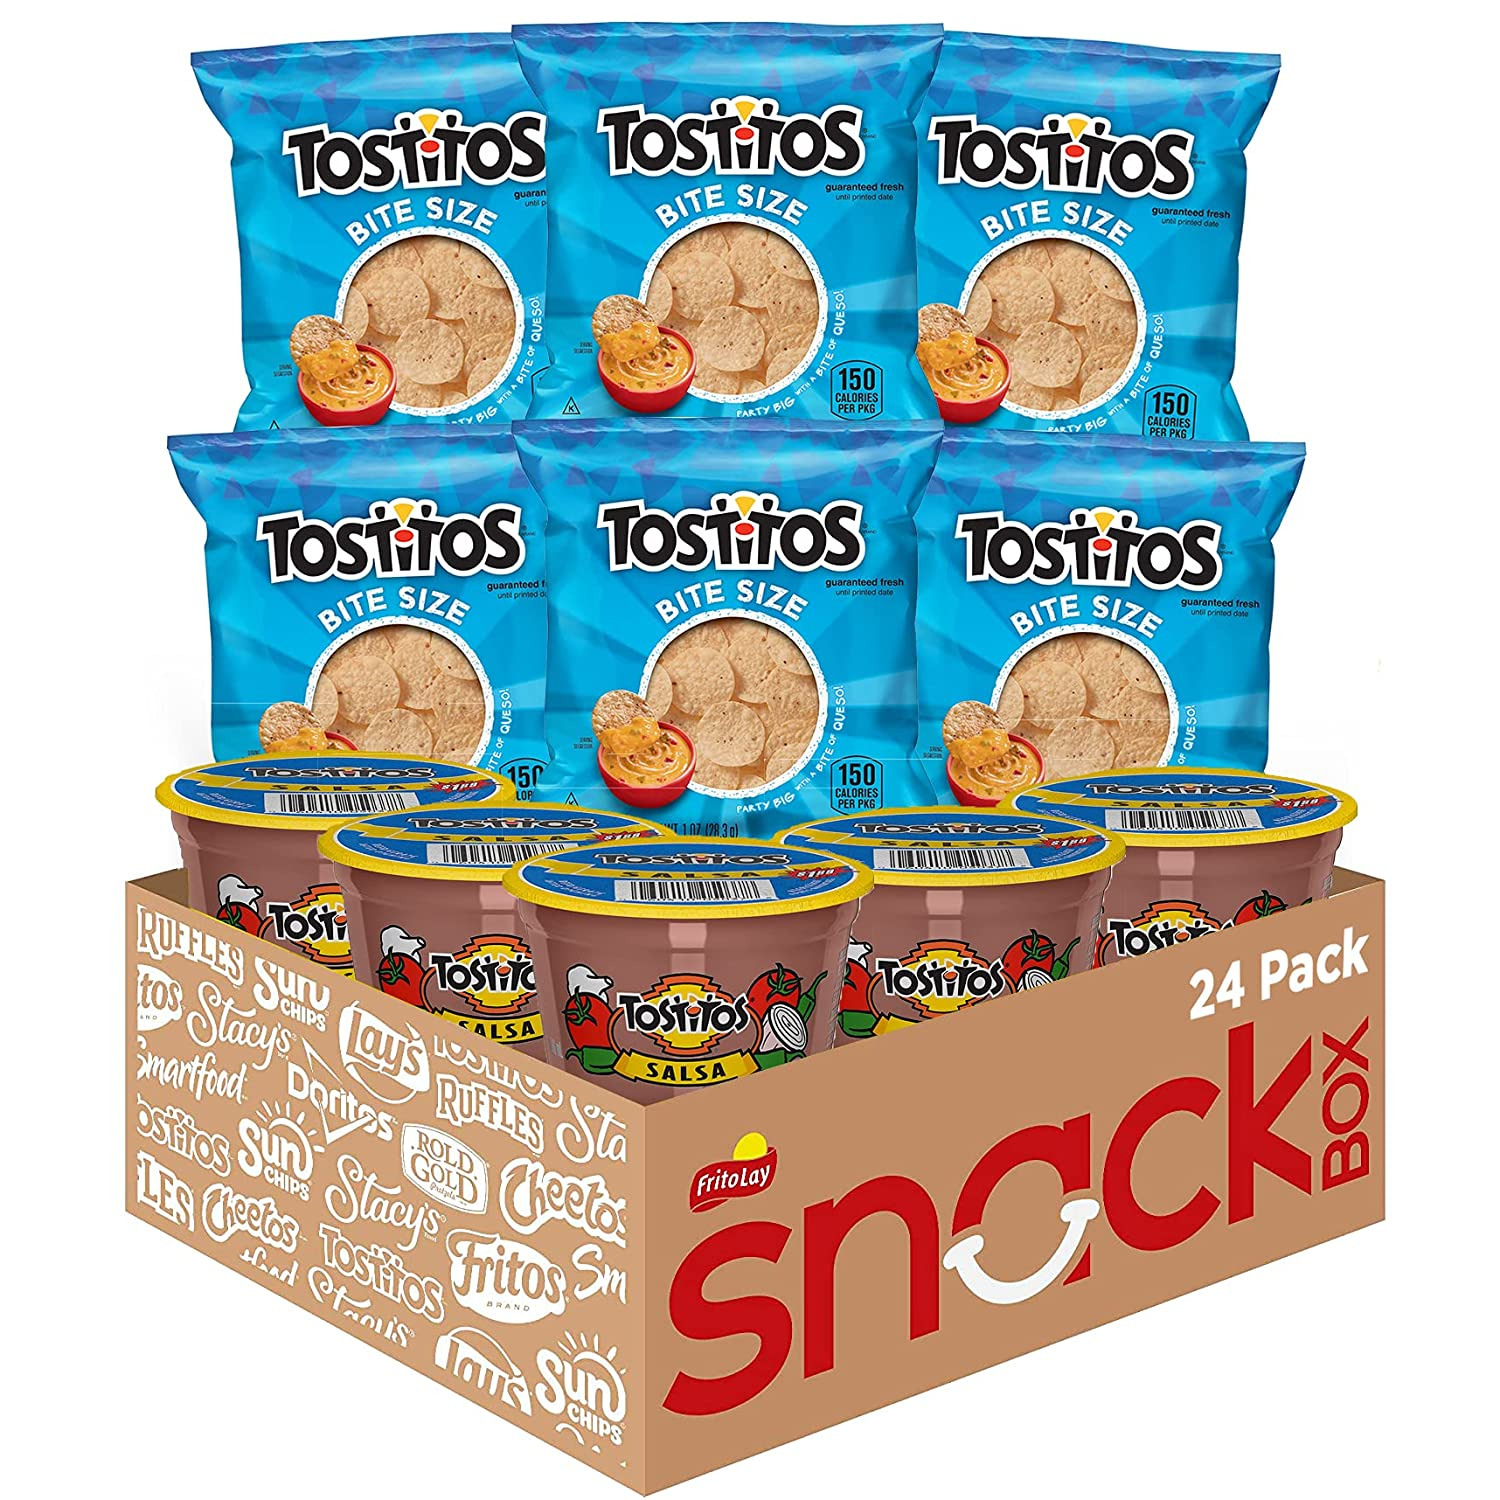 Tostitos Bite Size Rounds & Salsa Dip Cups Variety Pack, Single Serve Portions (